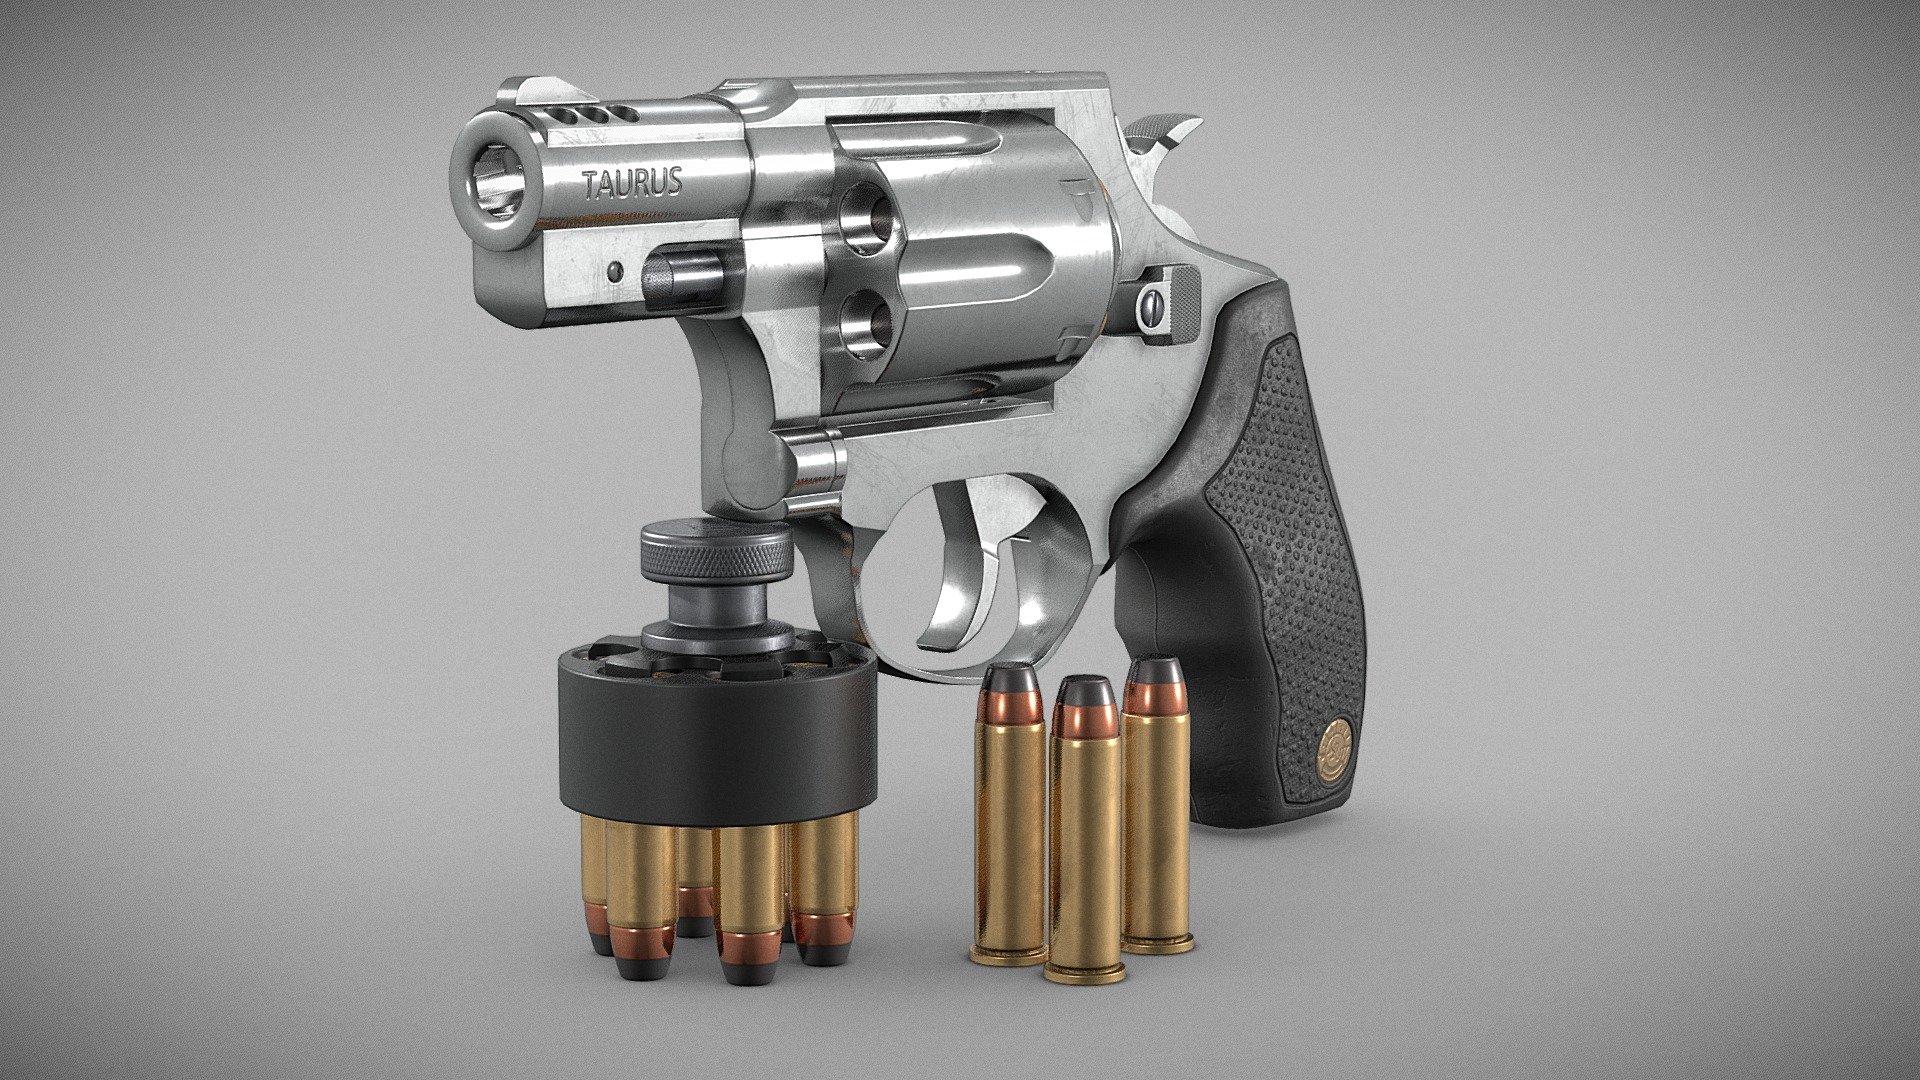 Taurus 606 Snub Nose Revolver, chambered in .357 Magnum rounds. Holds a total of 6 rounds in it's chambers, and has a ported barrel for reducing recoil. 

Production Period: 27th Feb 2024 - 7th March 2024

Modelled in Blender, Textured in Substance Painter.

Materials in PBR, PNG 16 bits. 4k Resolution. 

Artstation: https://www.artstation.com/artwork/rJkXL6 - Taurus 606 .357 Magnum Revolver - 3D model by 8sianDude (@haoliu95) 3d model